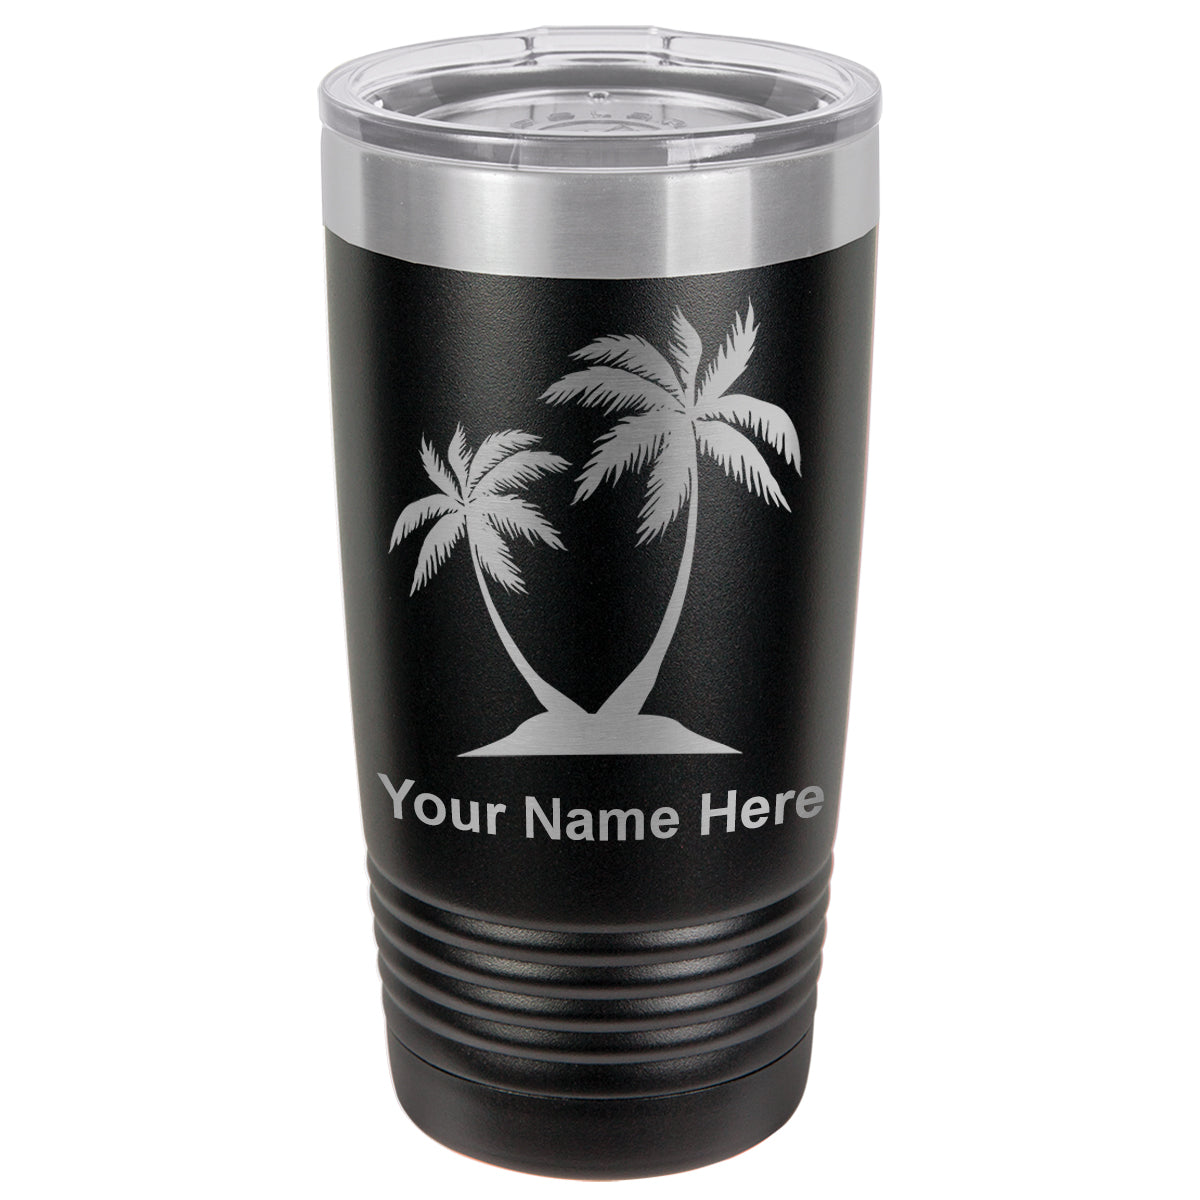 20oz Vacuum Insulated Tumbler Mug, Palm Trees, Personalized Engraving Included